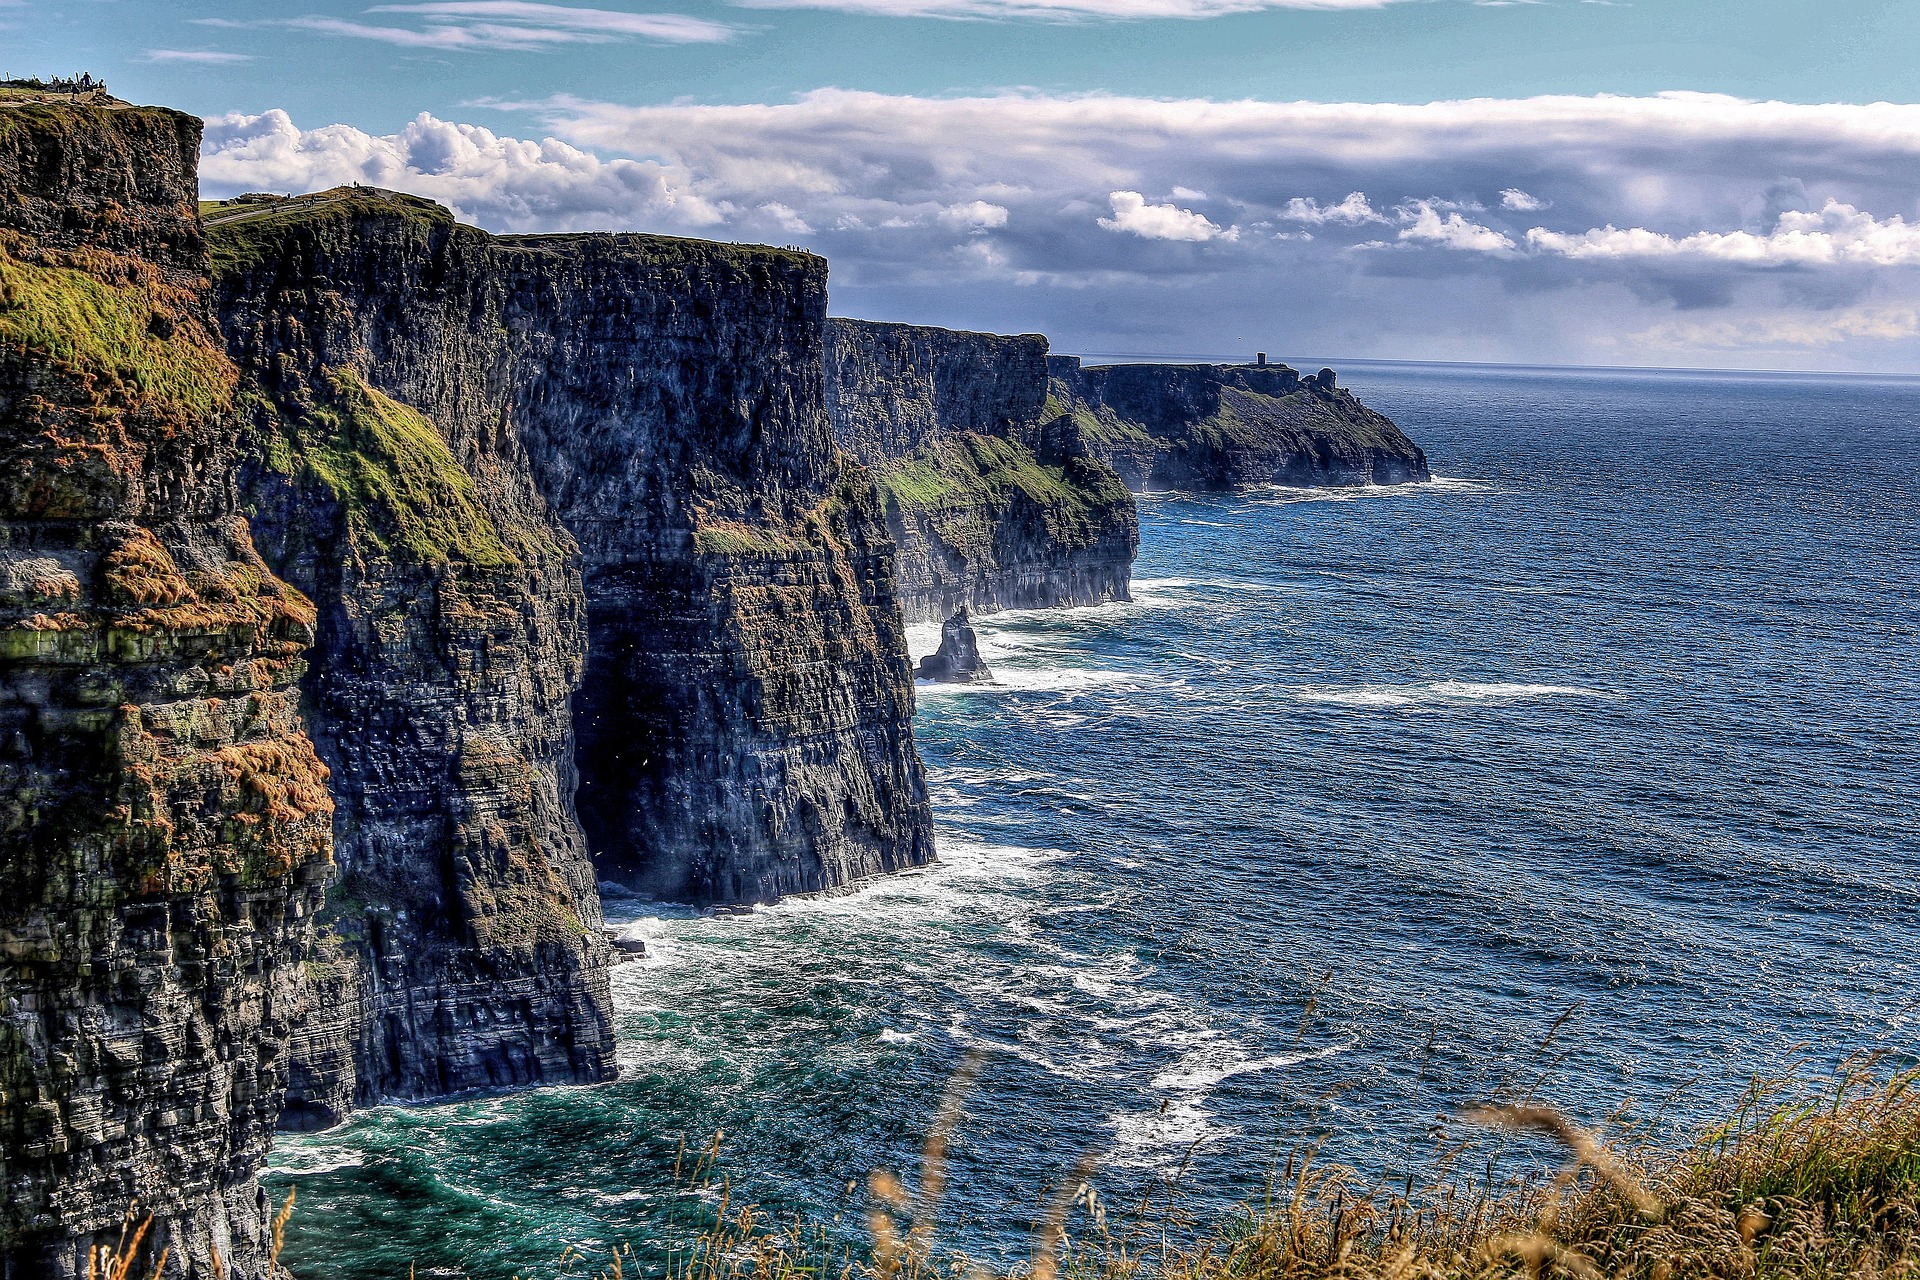 Where are the Cliffs of Moher?